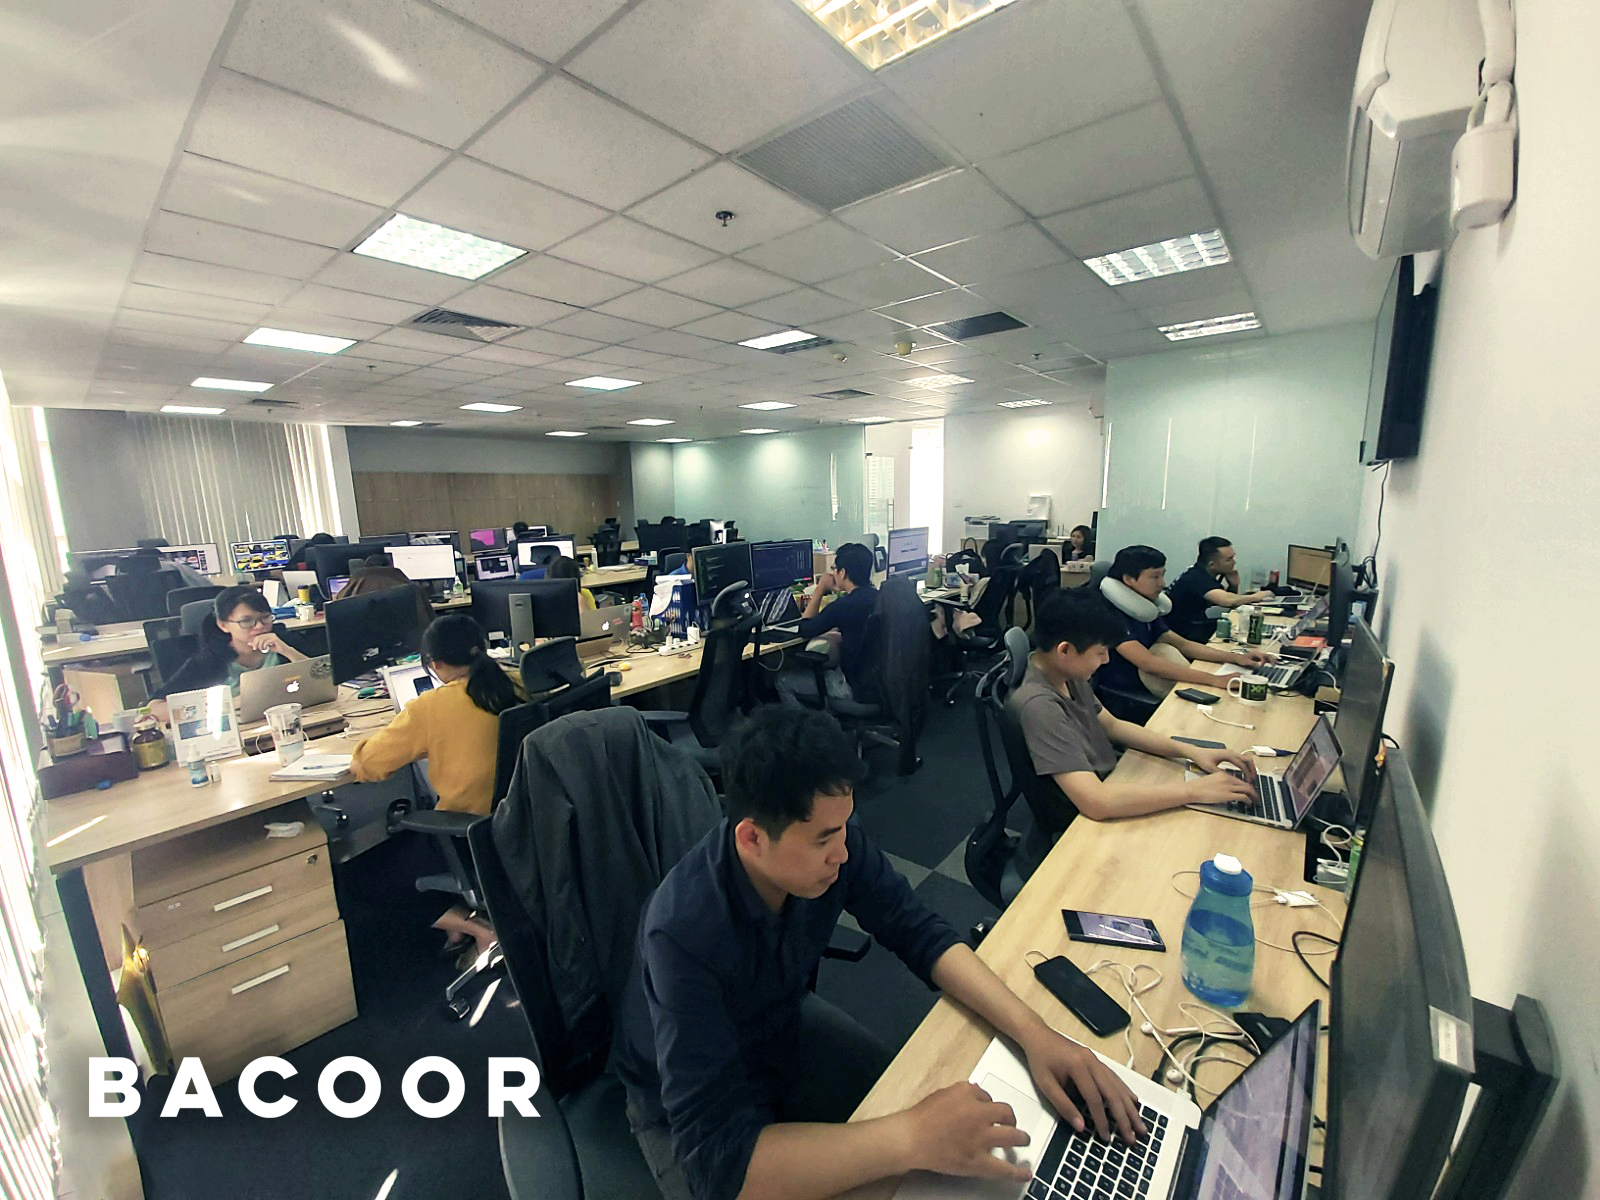 Bacoor Inc. is one of the blockchain leading companies in Japan